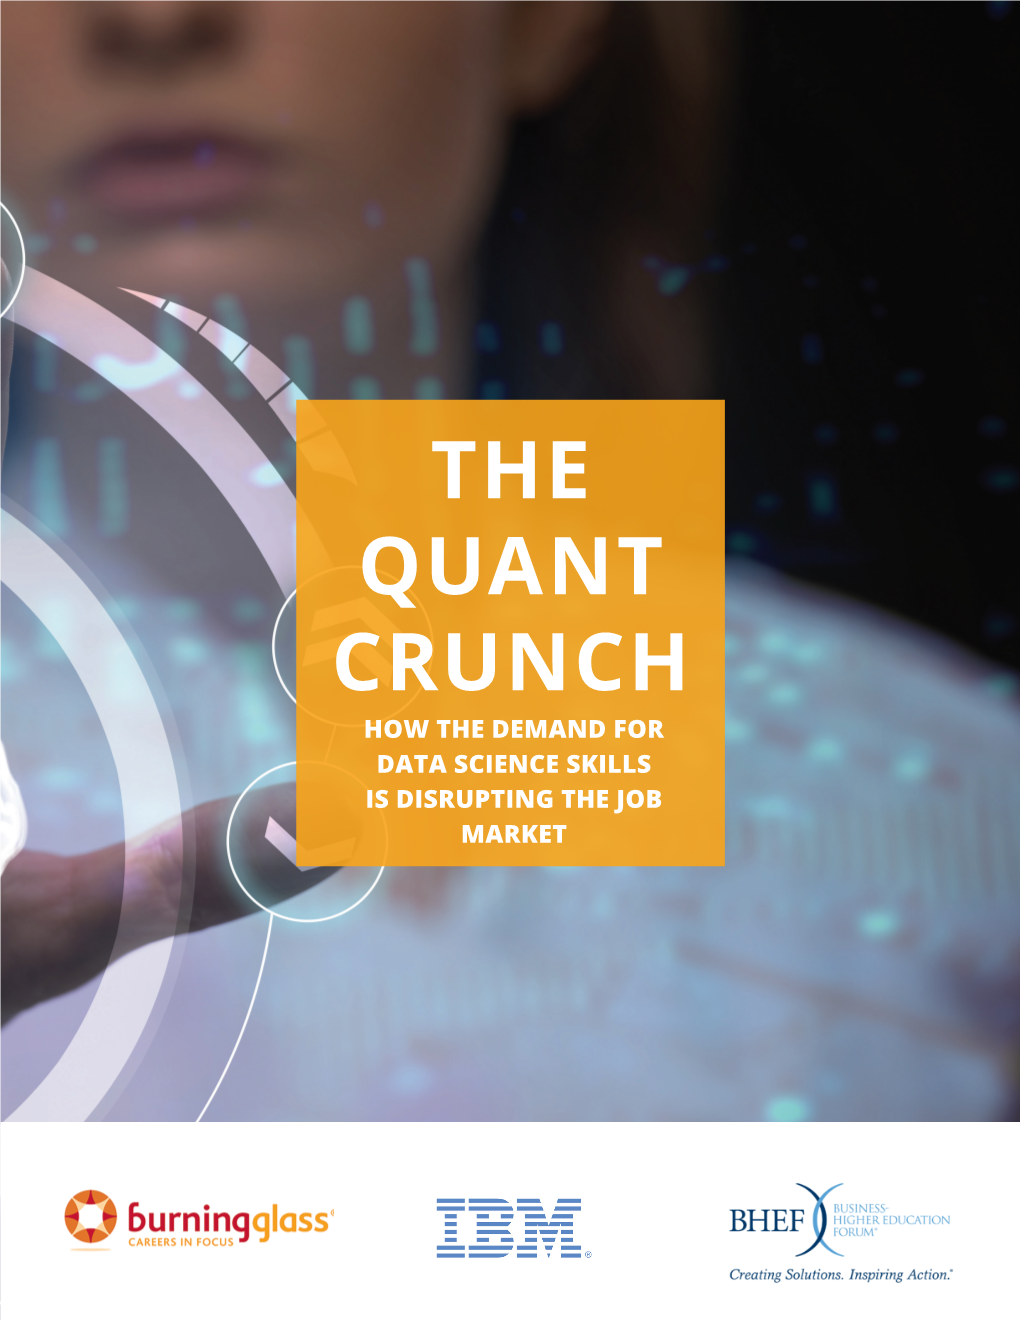 The Quant Crunch How the Demand for Data Science Skills Is Disrupting the Job Market